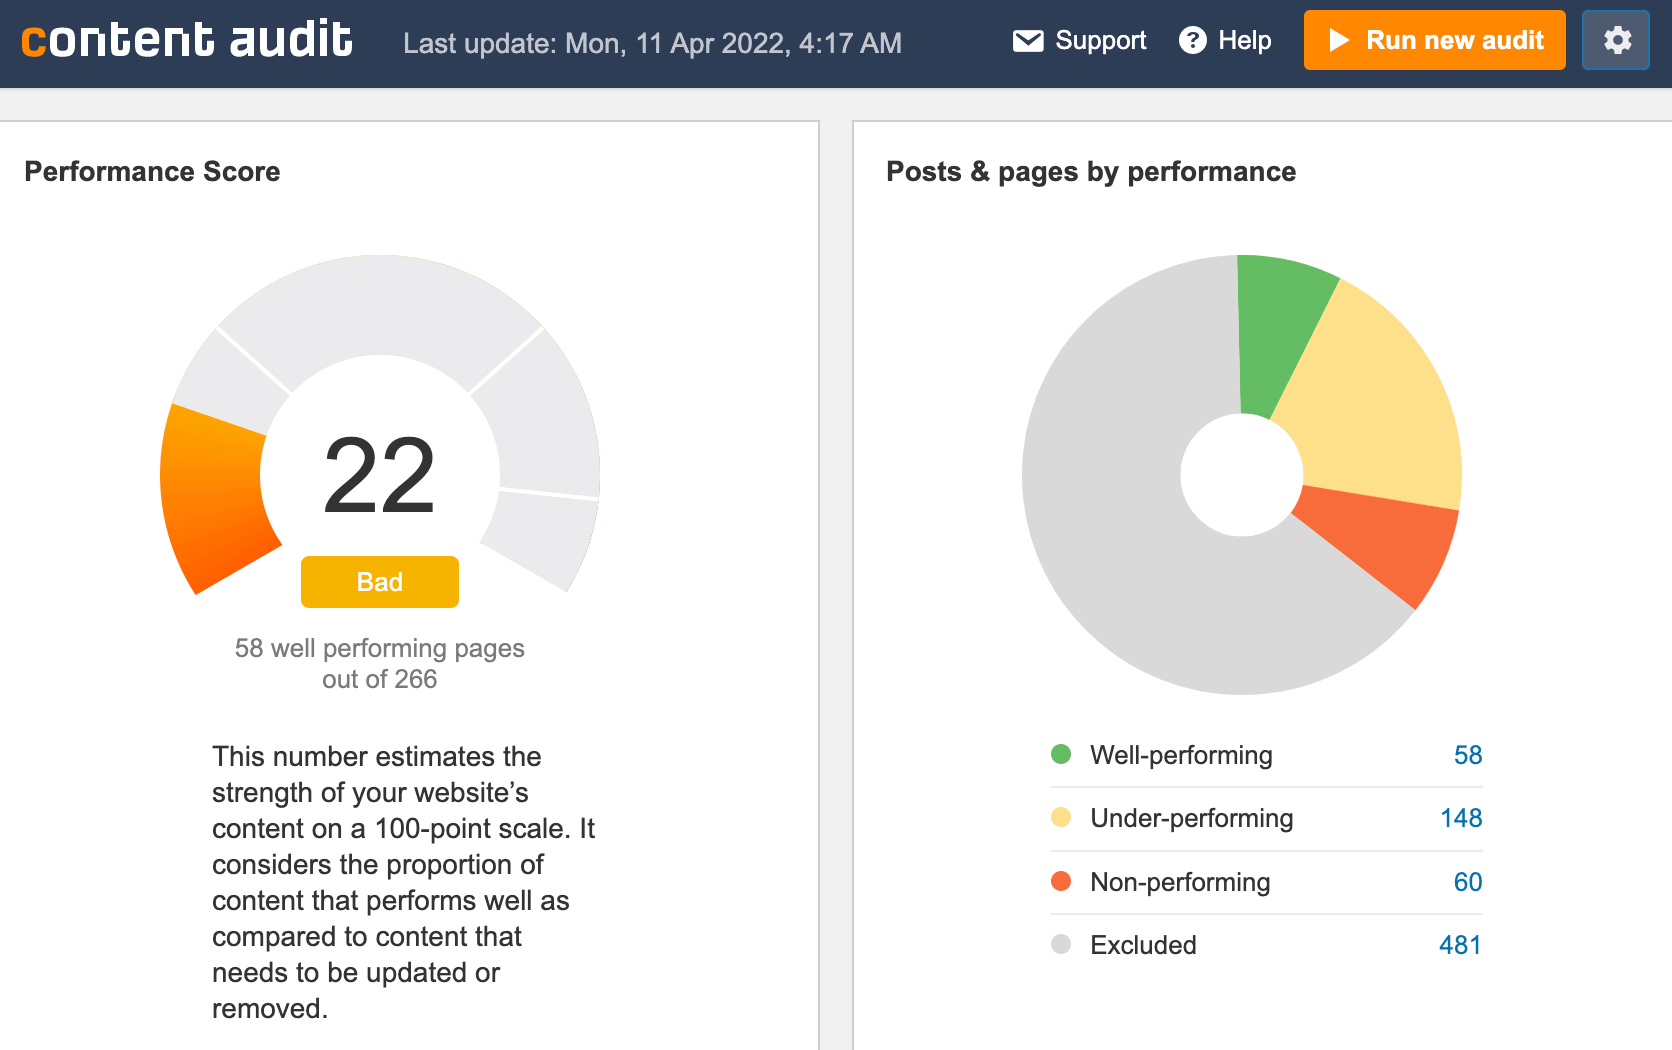 Page showing results of content audit. On left, performance score with explanation below; on right, pie chart showing no. of pages that are performing well, not performing well, etc 